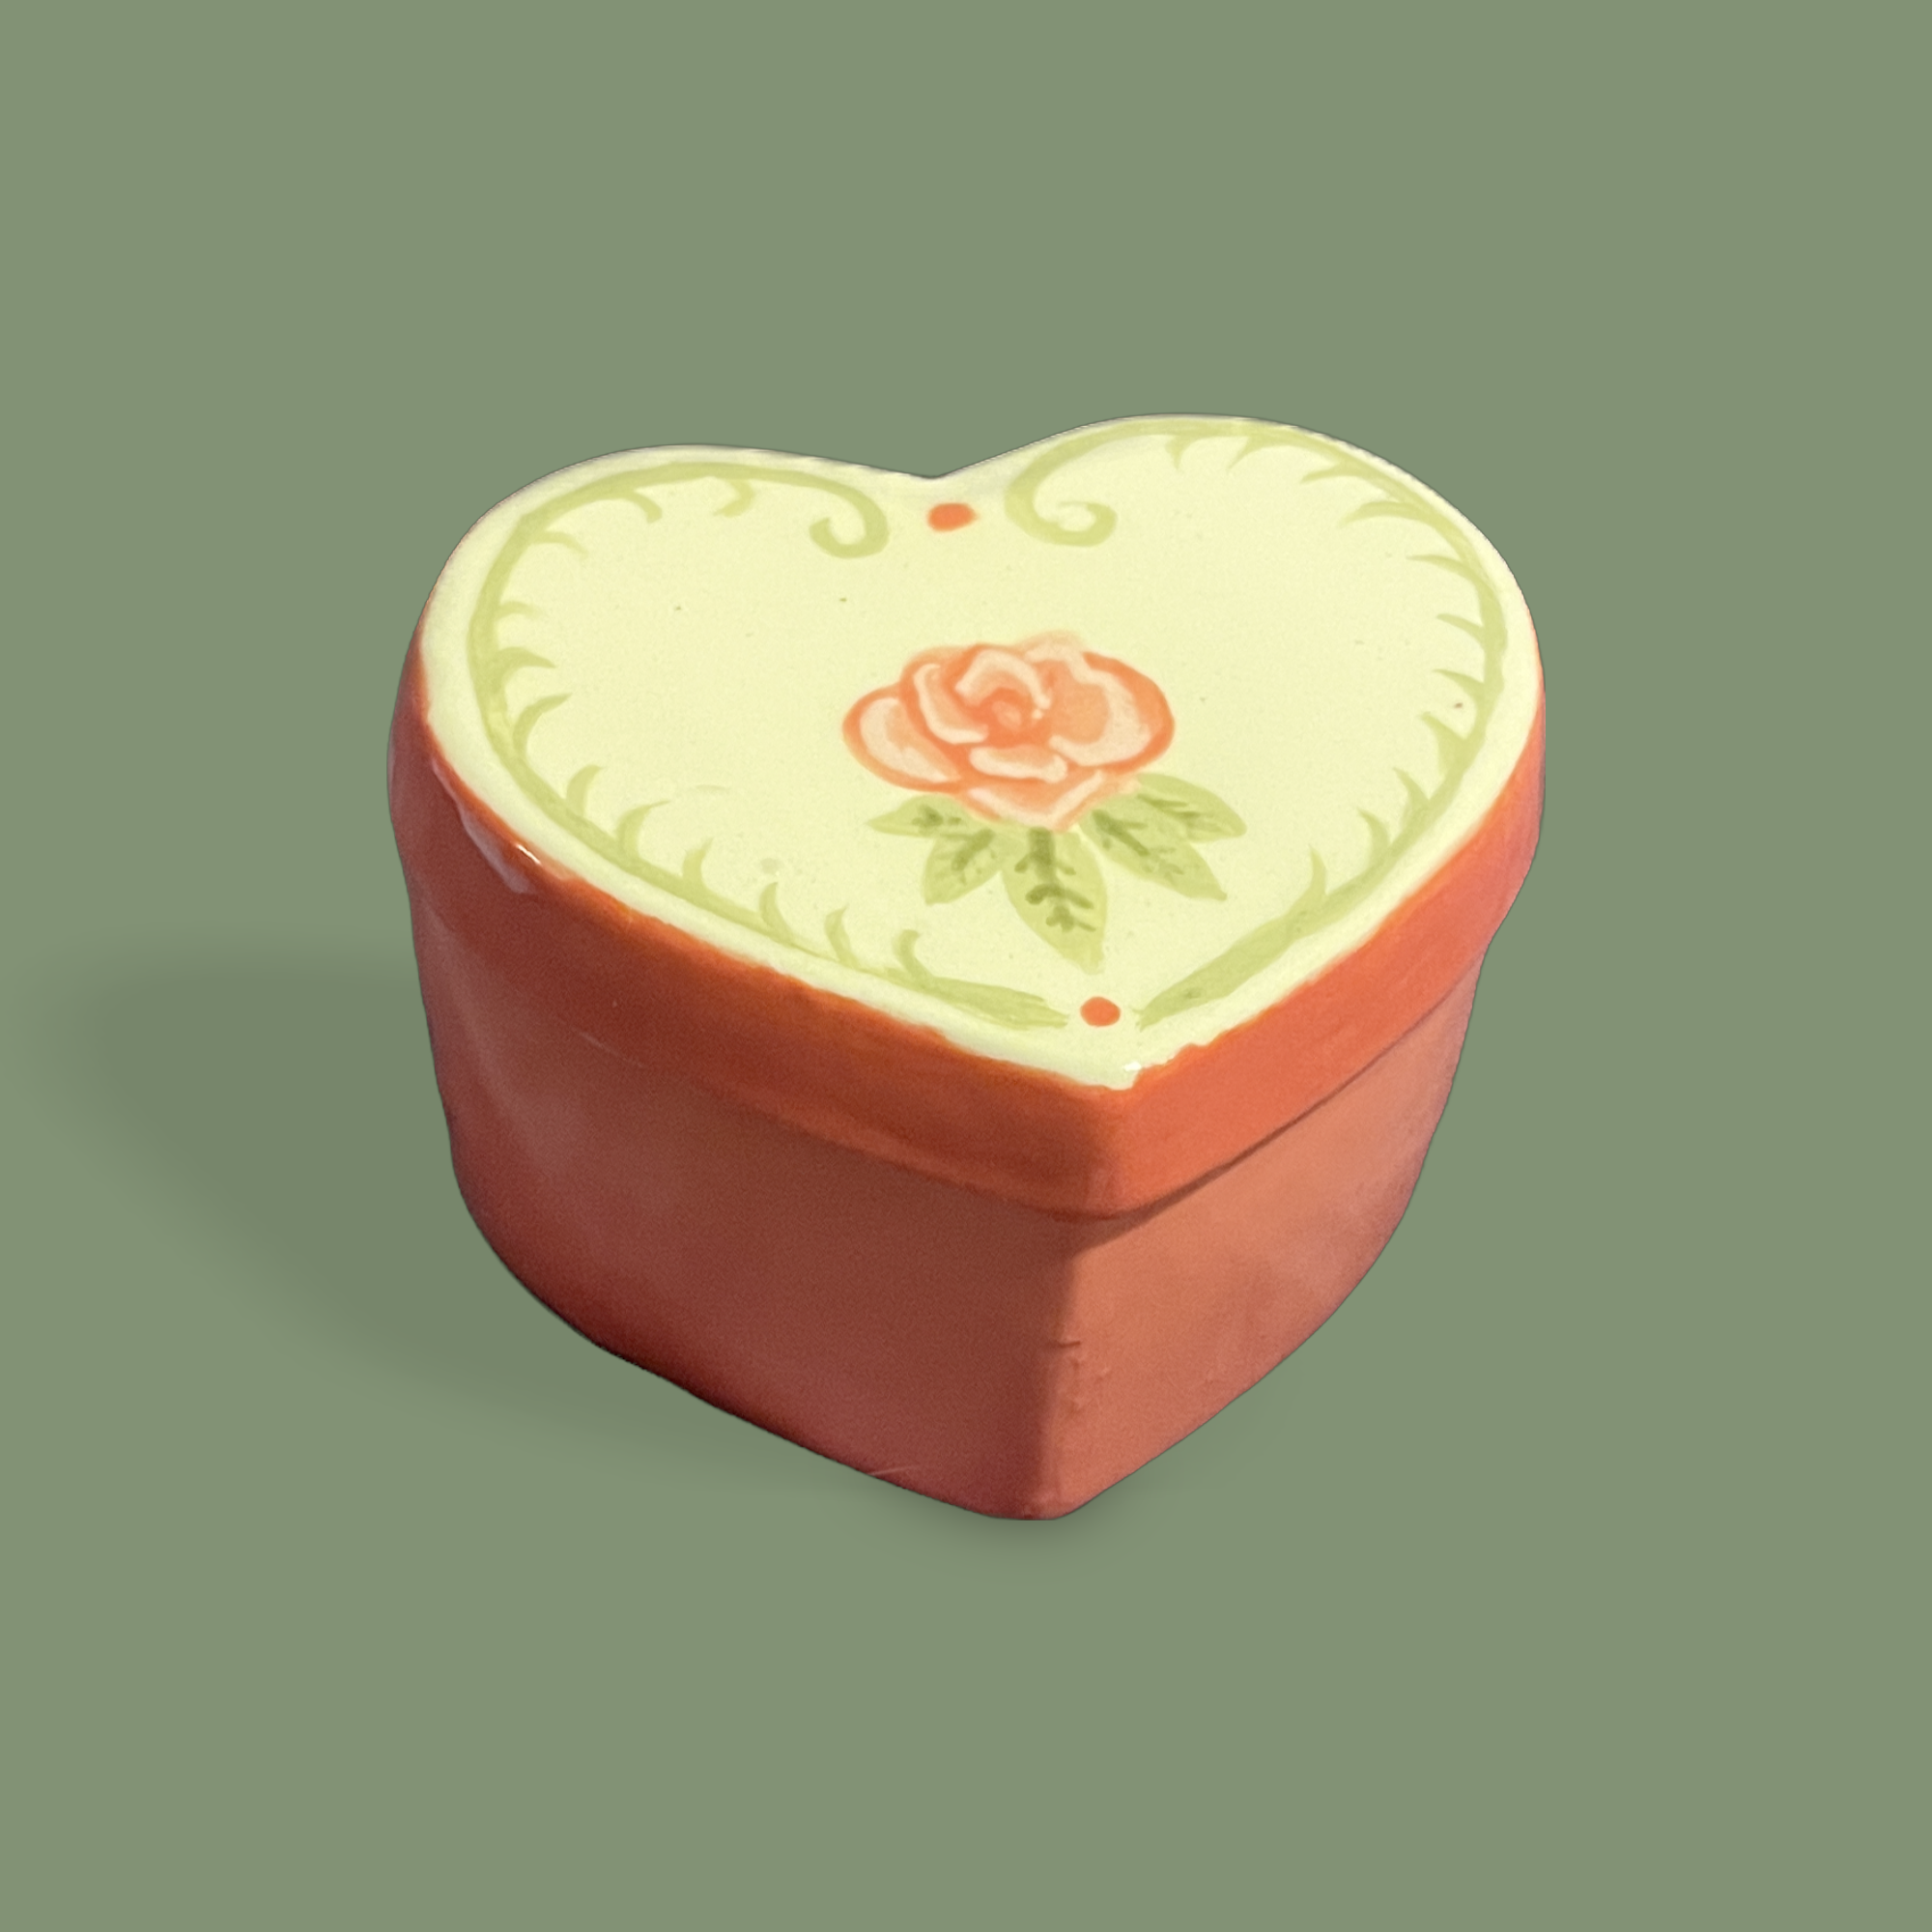 Heart Shaped Trinket Box with a pink rose painted on top.